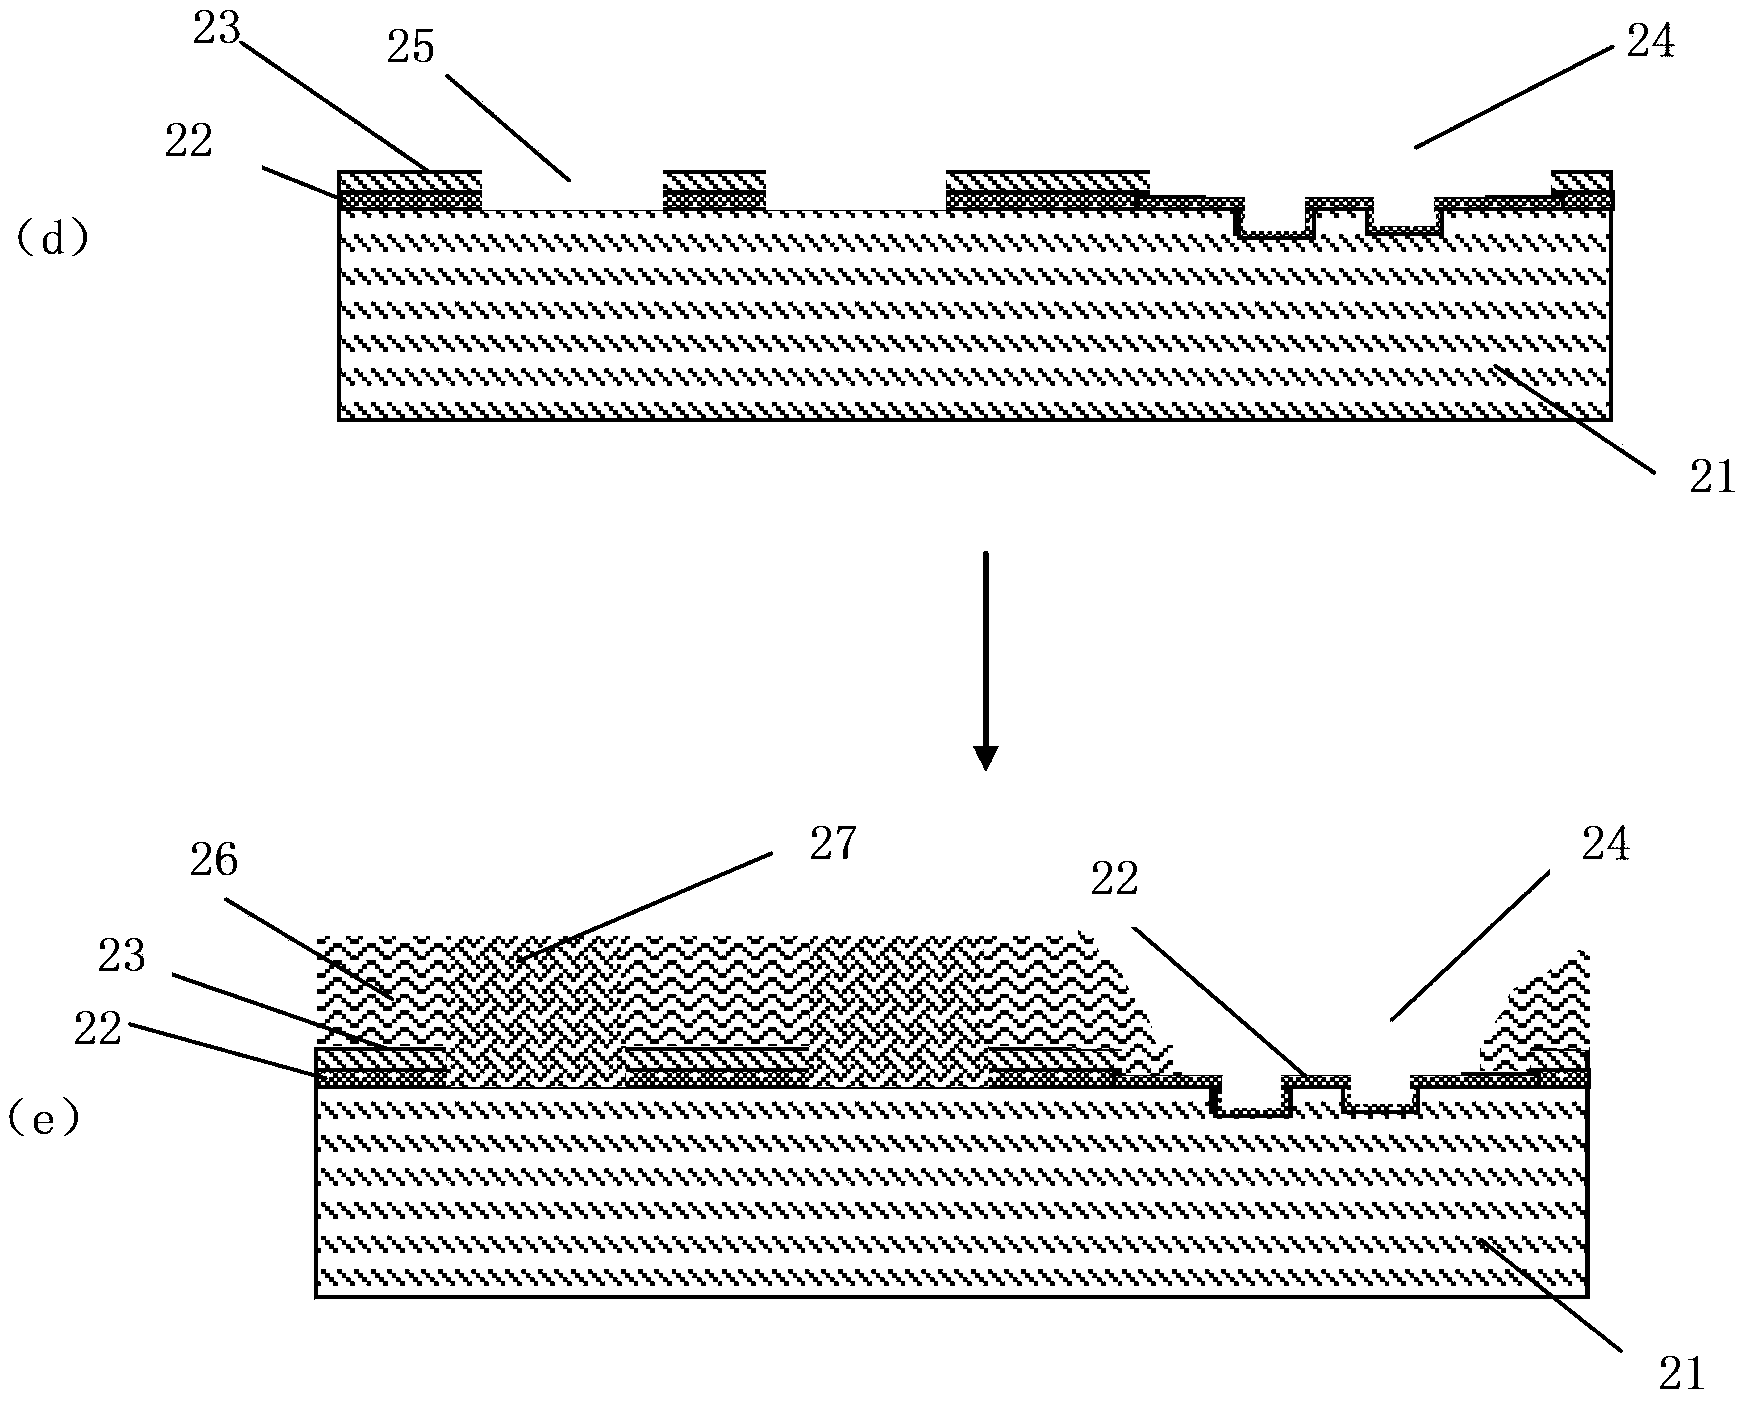 Structure of comprehensive type silicon epitaxy process photoetching alignment mark and manufacturing method